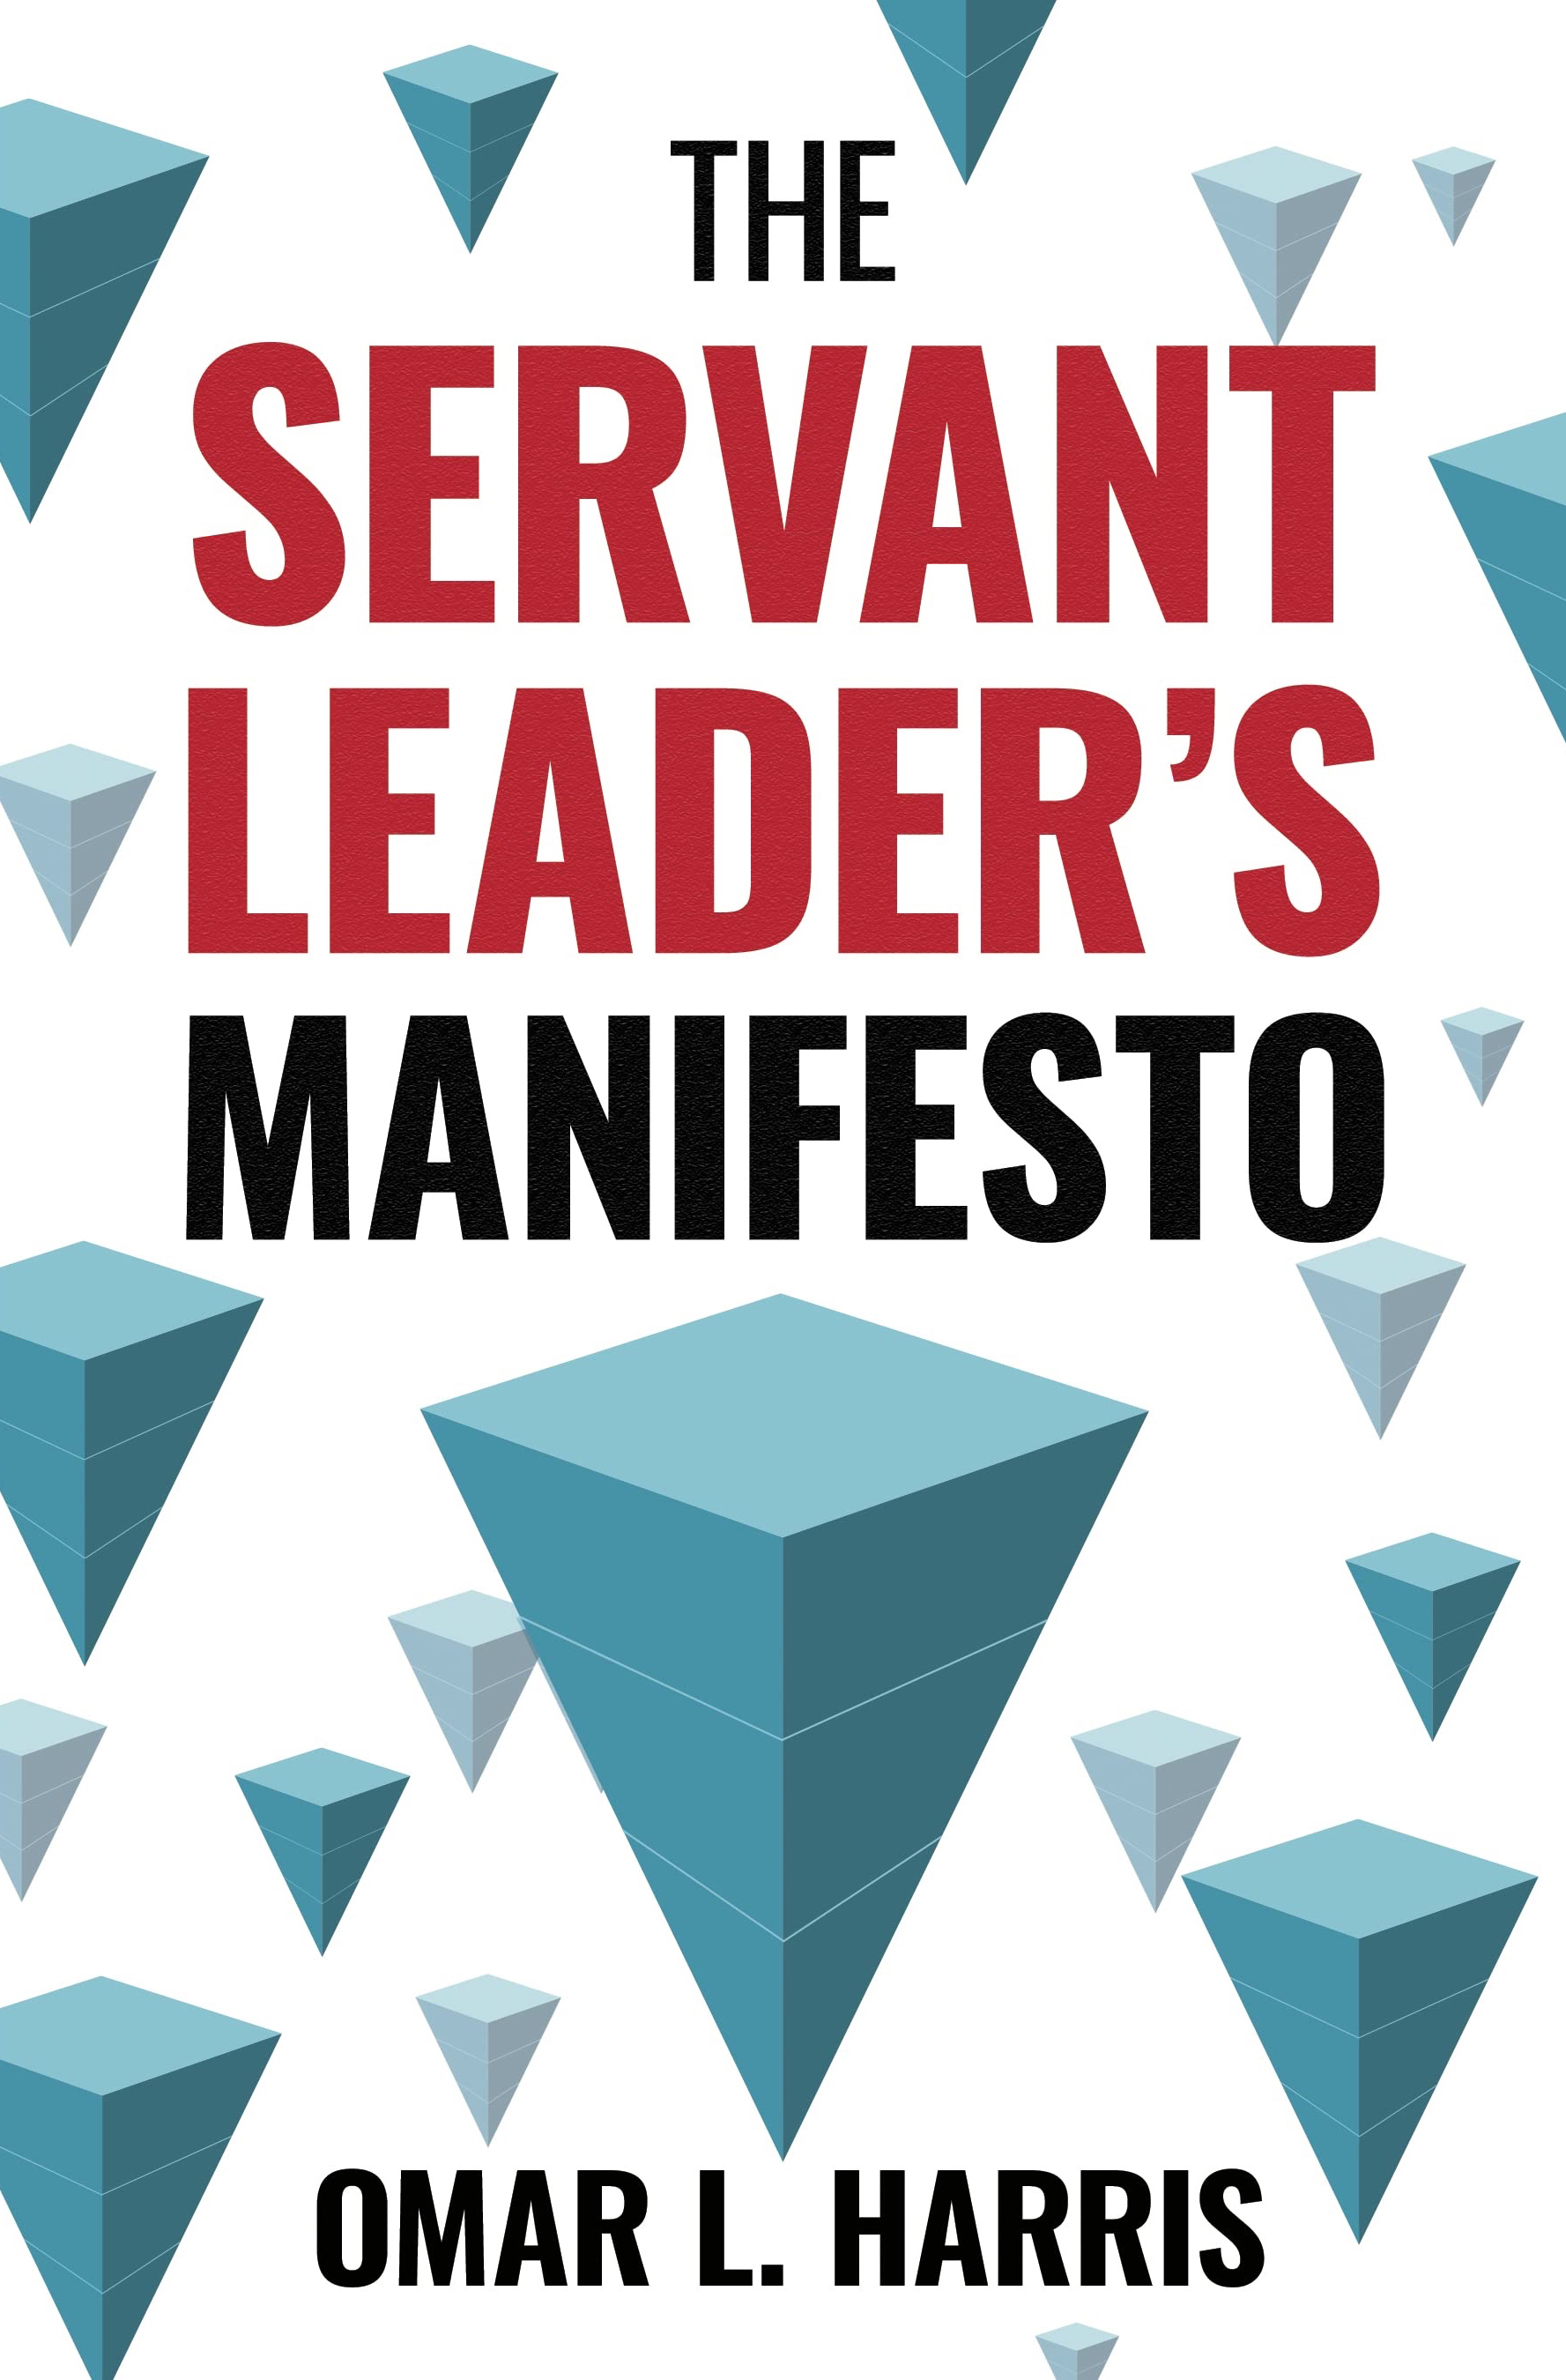 "The Servant Leader's Manifesto" by Award-Winning Bestselling Author, Coach and Intent Consulting Founder Omar L. Harris